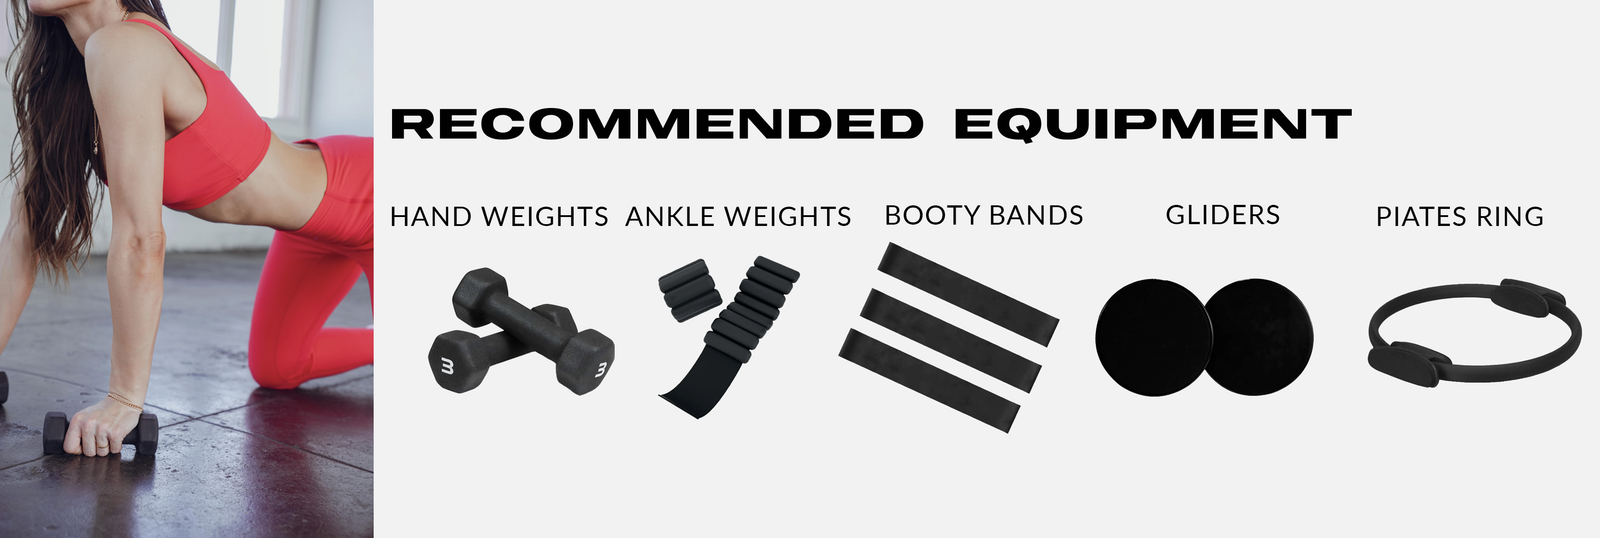 recommended equipment with trainer in red athletic wear on right hand side and equipment listed on the left in this order 3lb hand weights 2lb bala ankle weights booty bands gliders and pilates ring click this to buy on amazon store